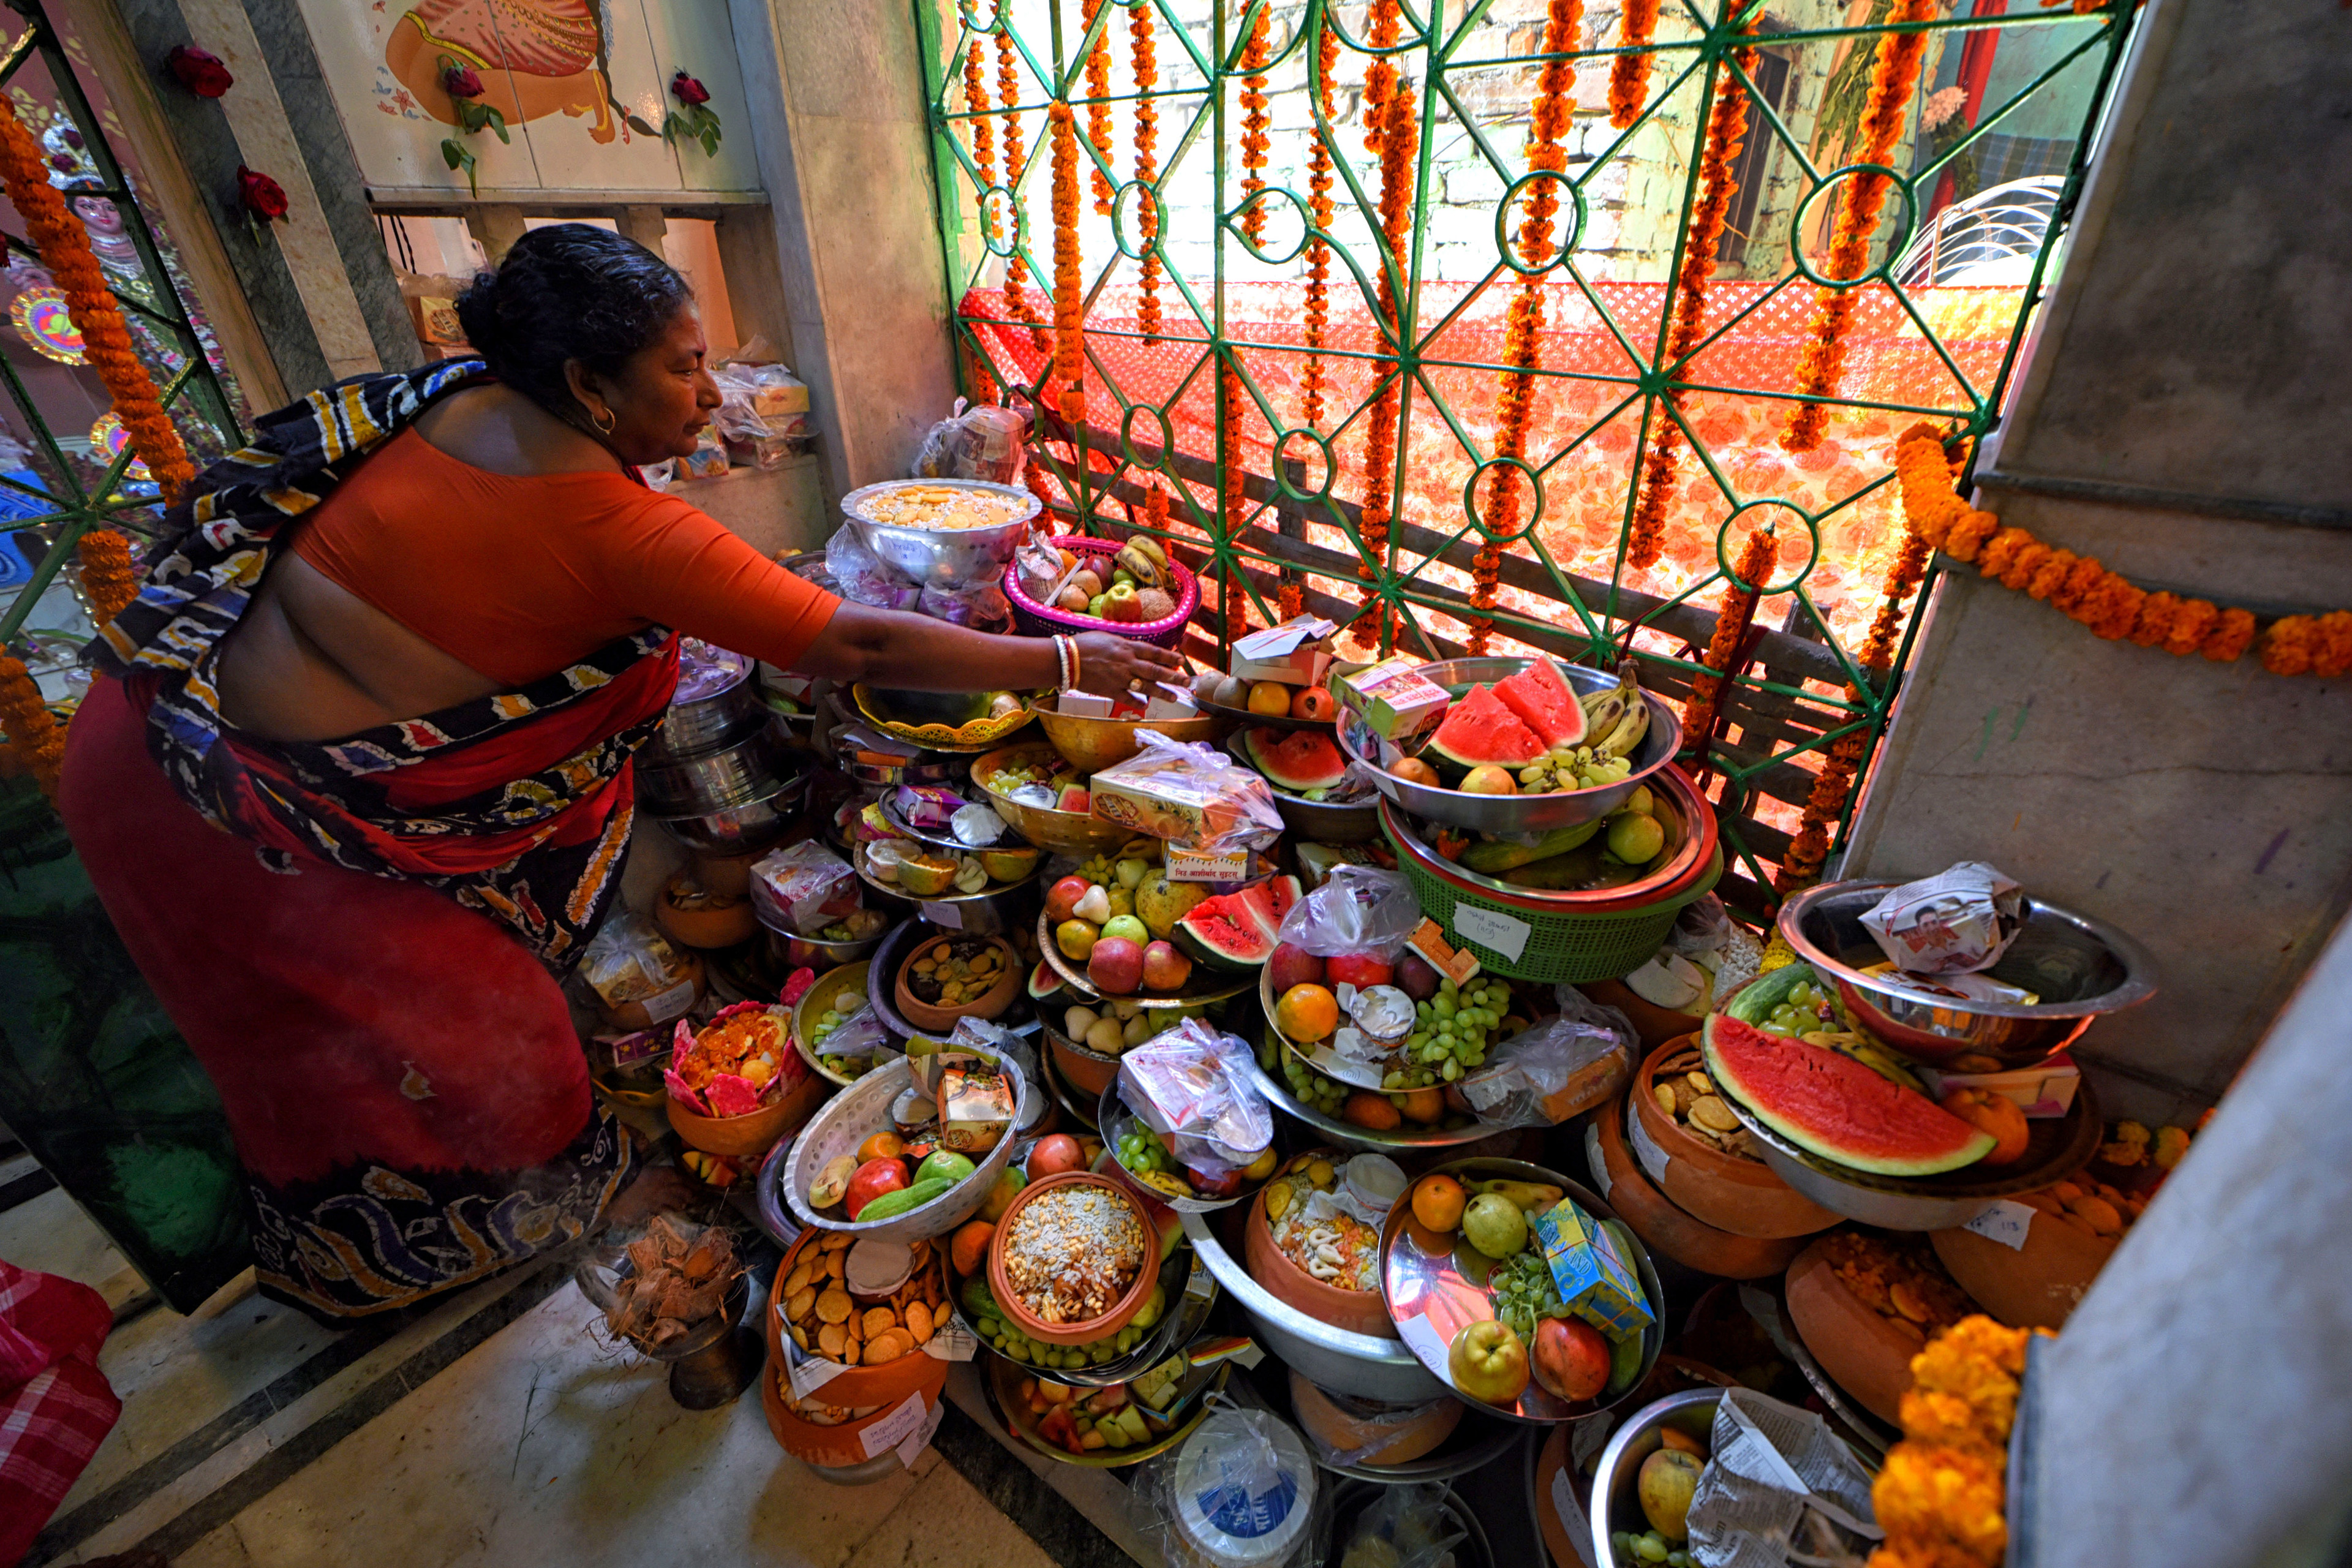 In this vivid, brightly colored photograph, an Indian woman wearing a bright orange sari sets out offerings of food, flowers, and decorative items at a shrine for Shitala Mata. Marigolds are hung in chains around the offerings, and a large window illuminates the room in natural light.